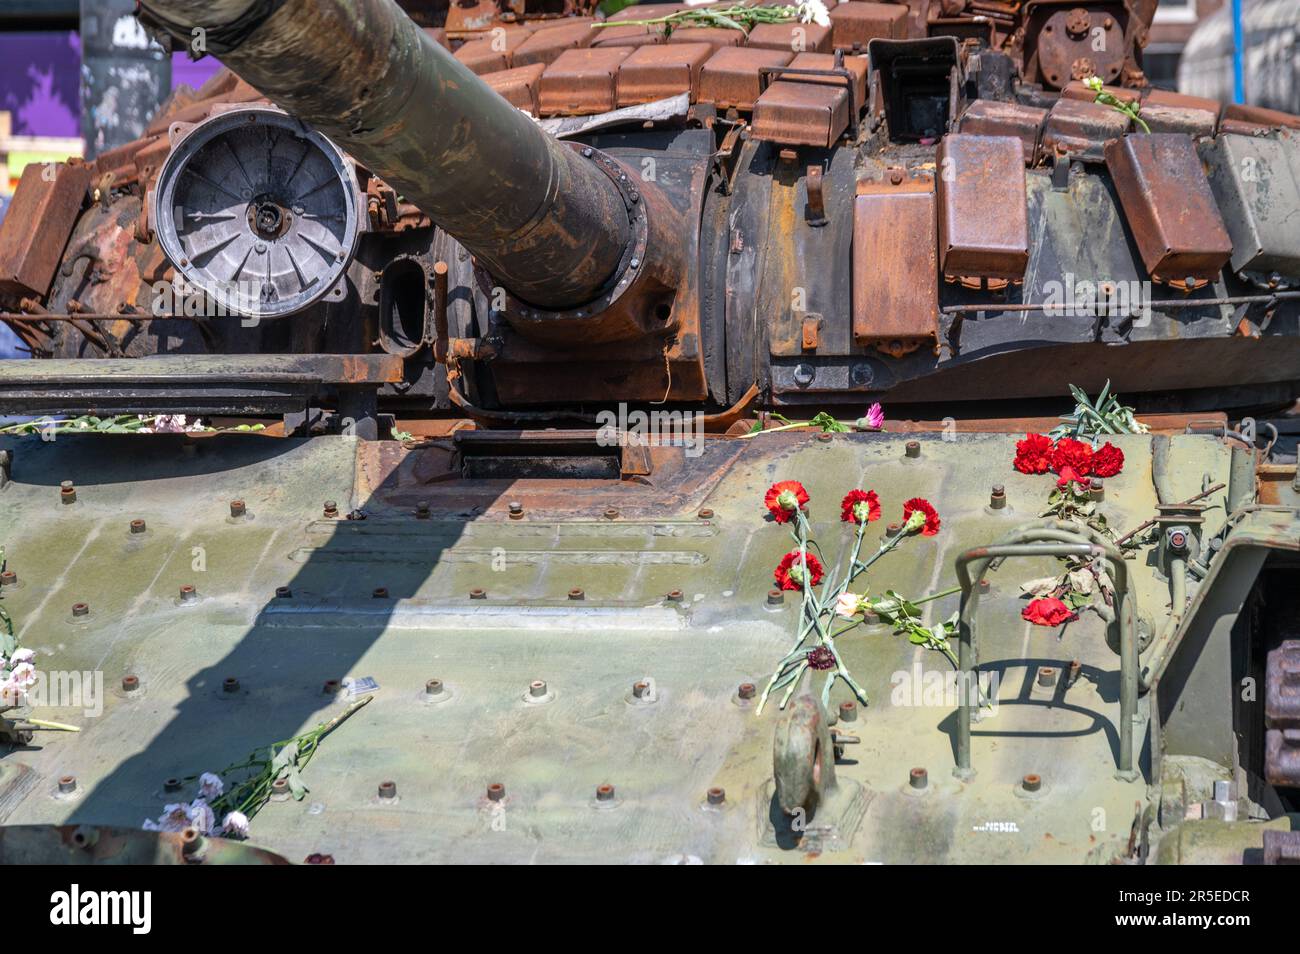 Flowers on a wrecked tank Stock Photo